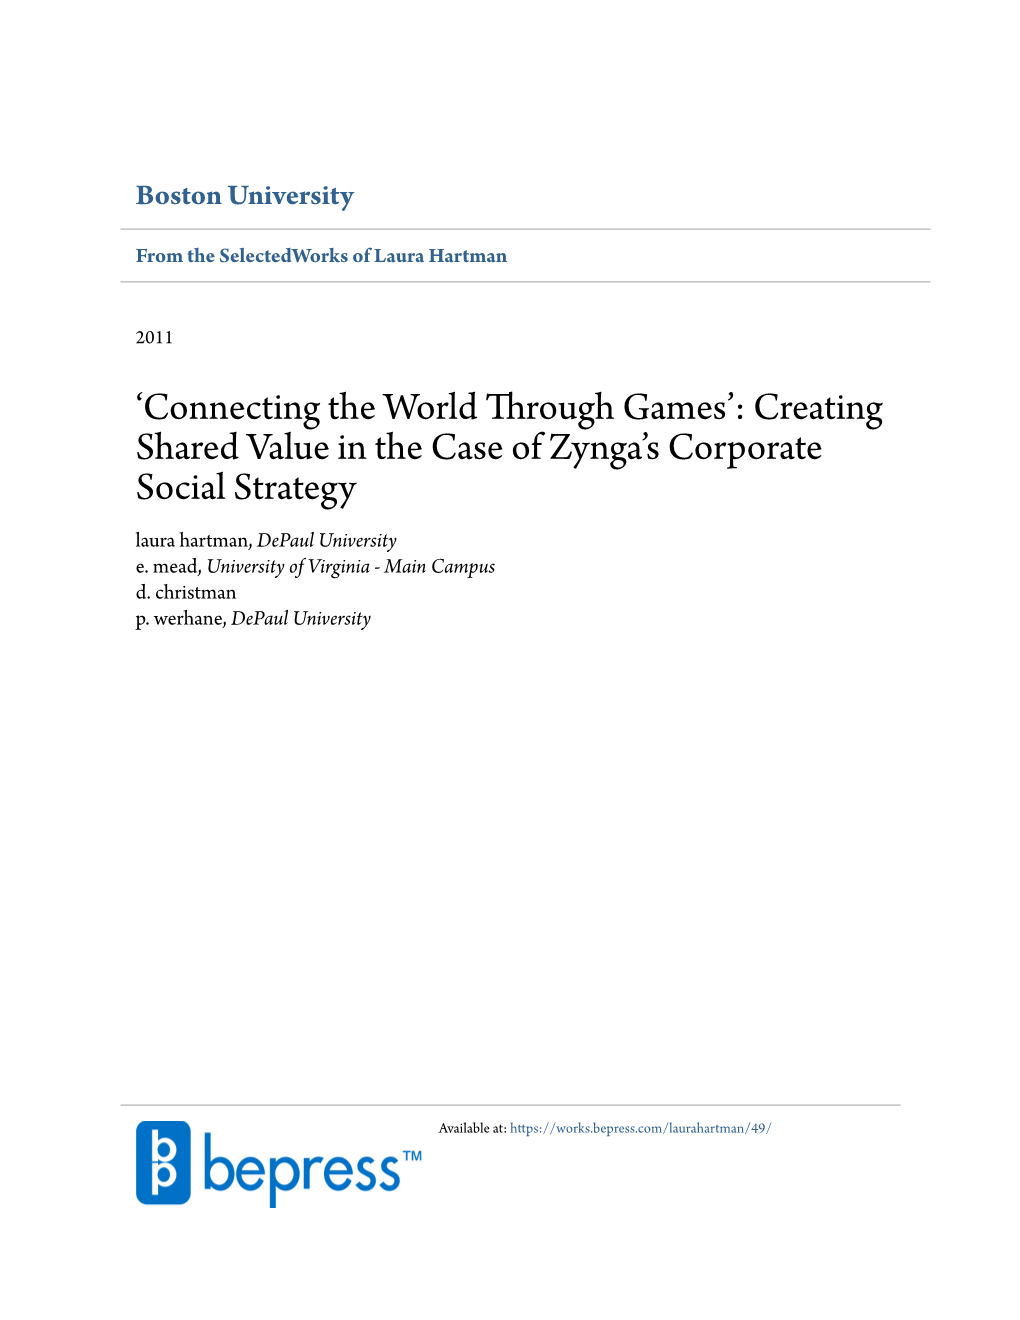 'Connecting the World Through Games': Creating Shared Value In